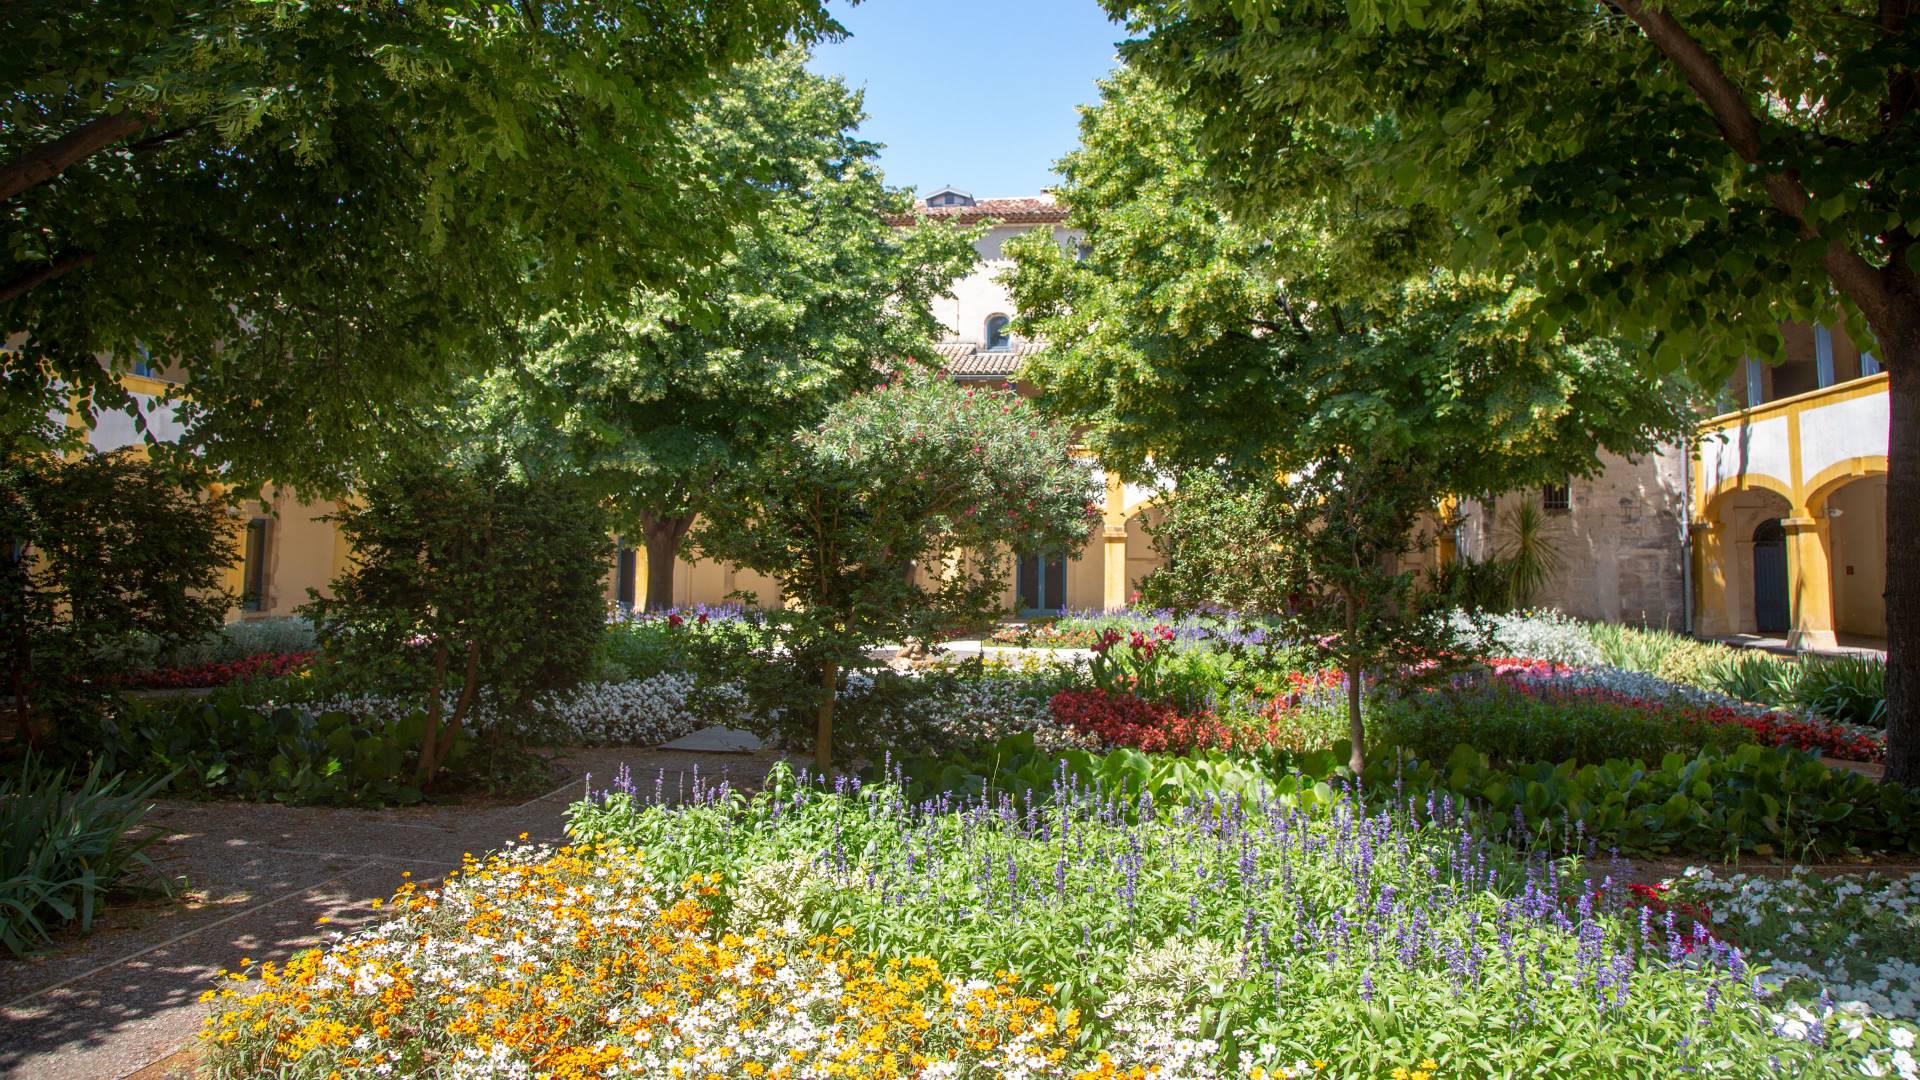 House and gardens in Arles, France